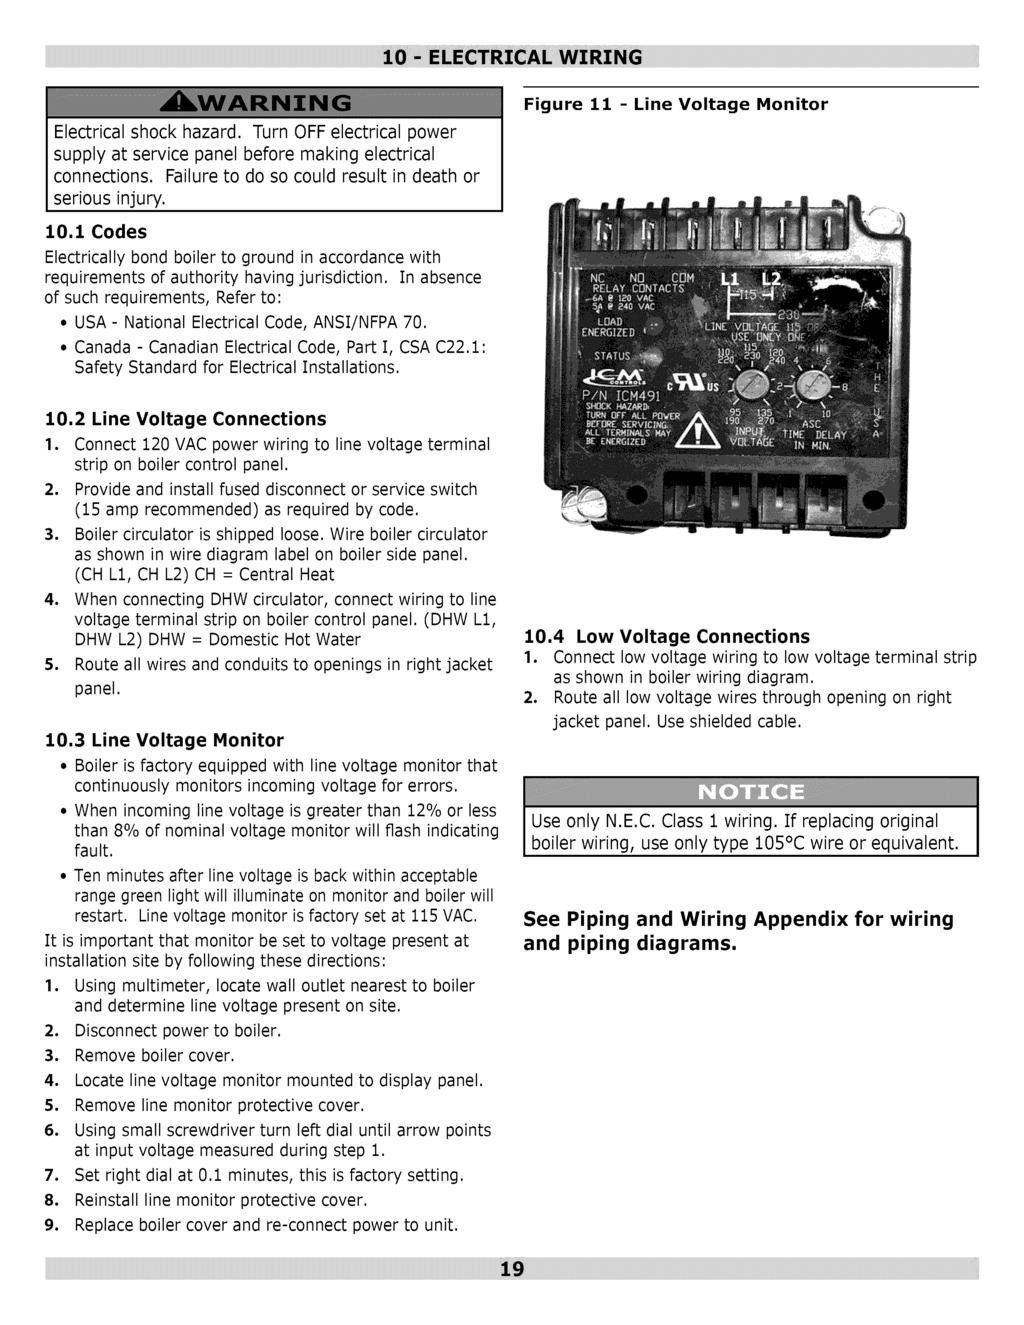 Figure 11 - Line Voltage Monitor Electrical shock hazard. Turn OFF electrical power supply at service panel before making electrical connections. Failure to do so could result in death or serious 10.